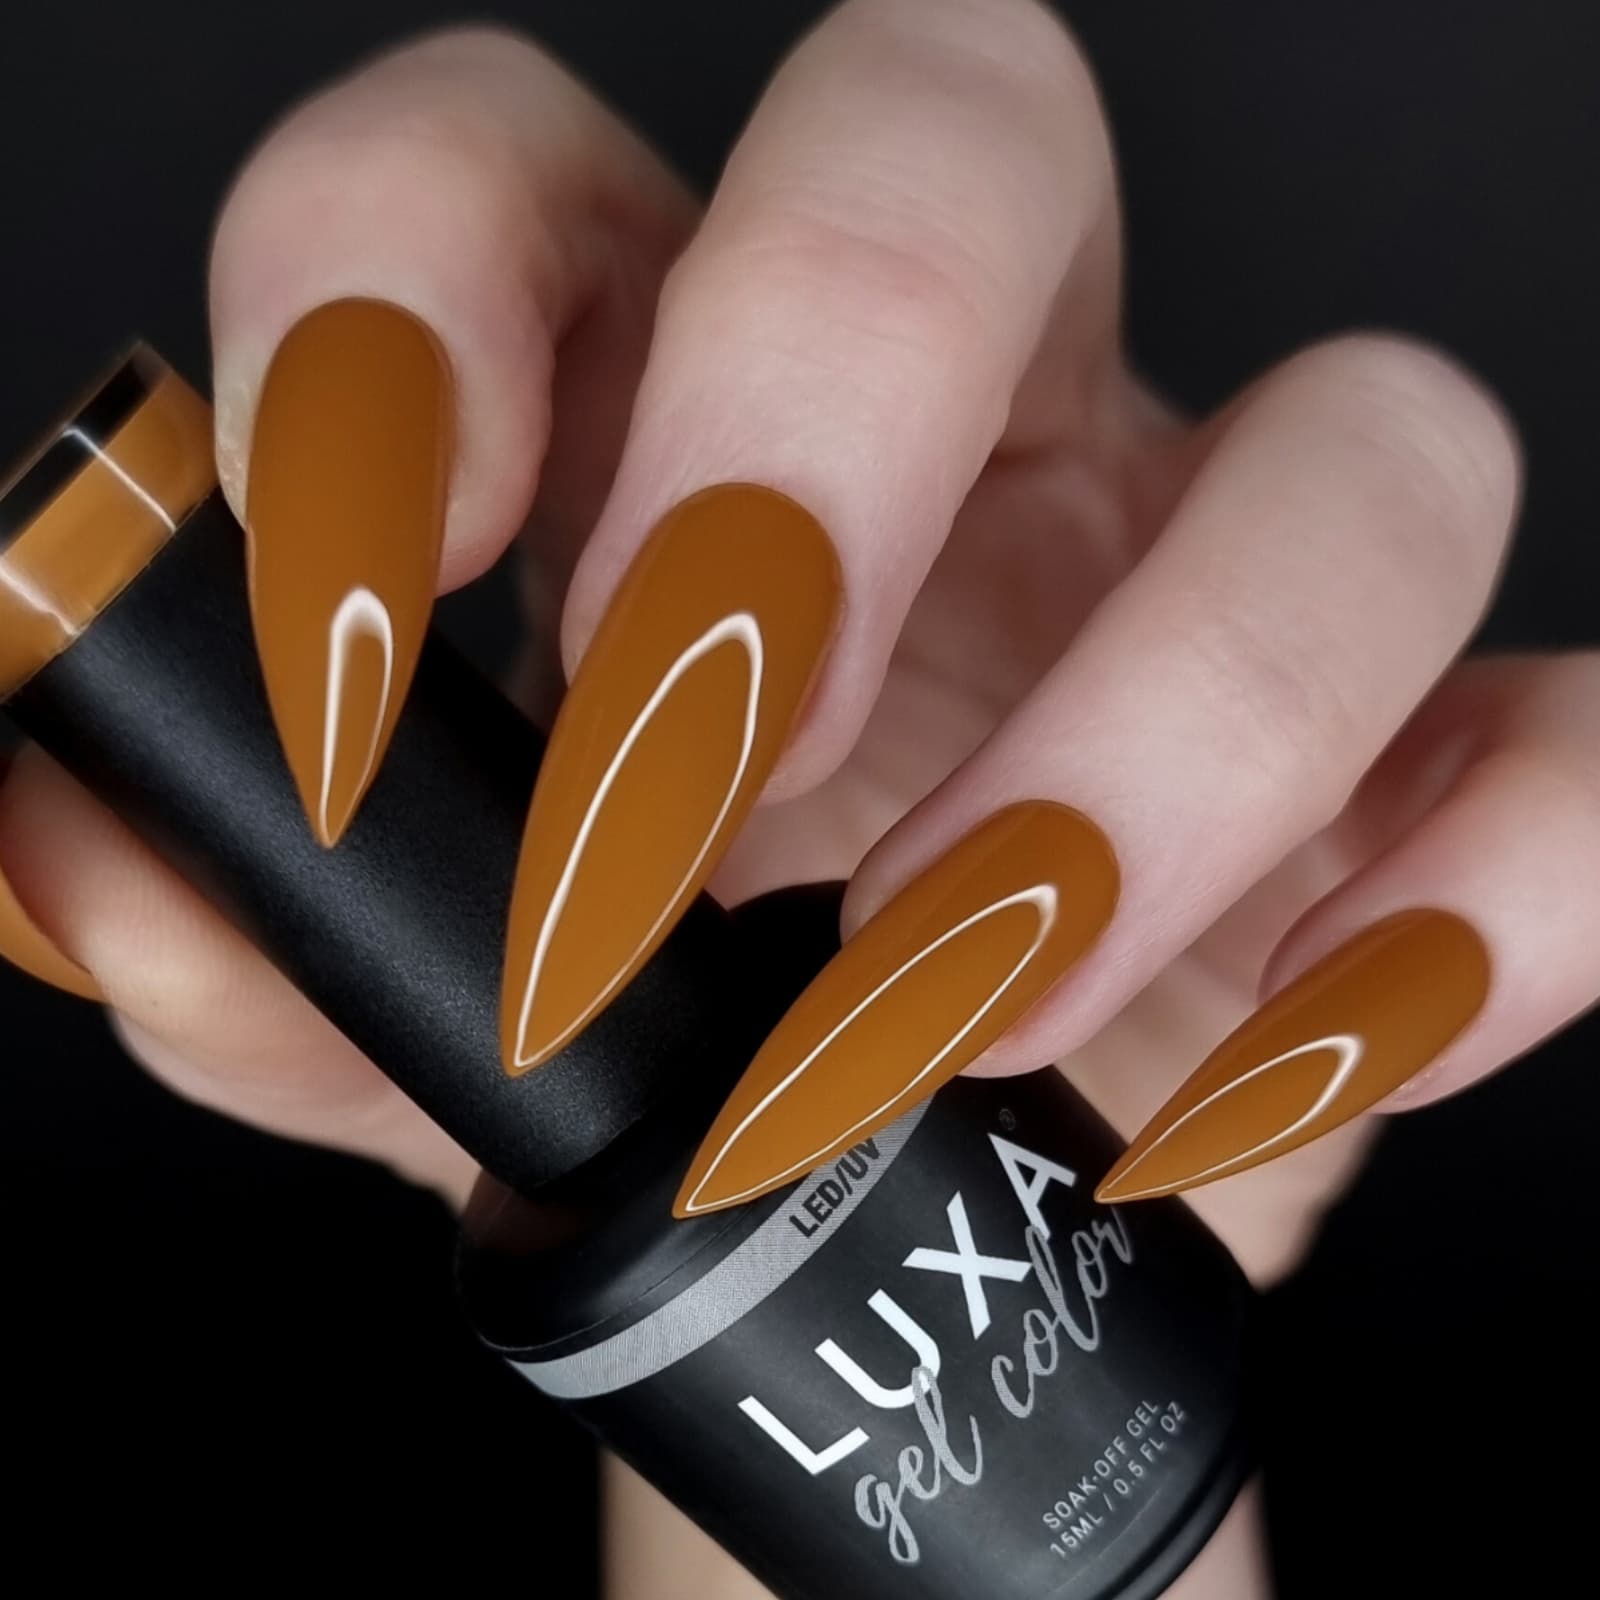 Luxapolish Rockin' Roccan Collection - 8pcs with free painted swatch sticks